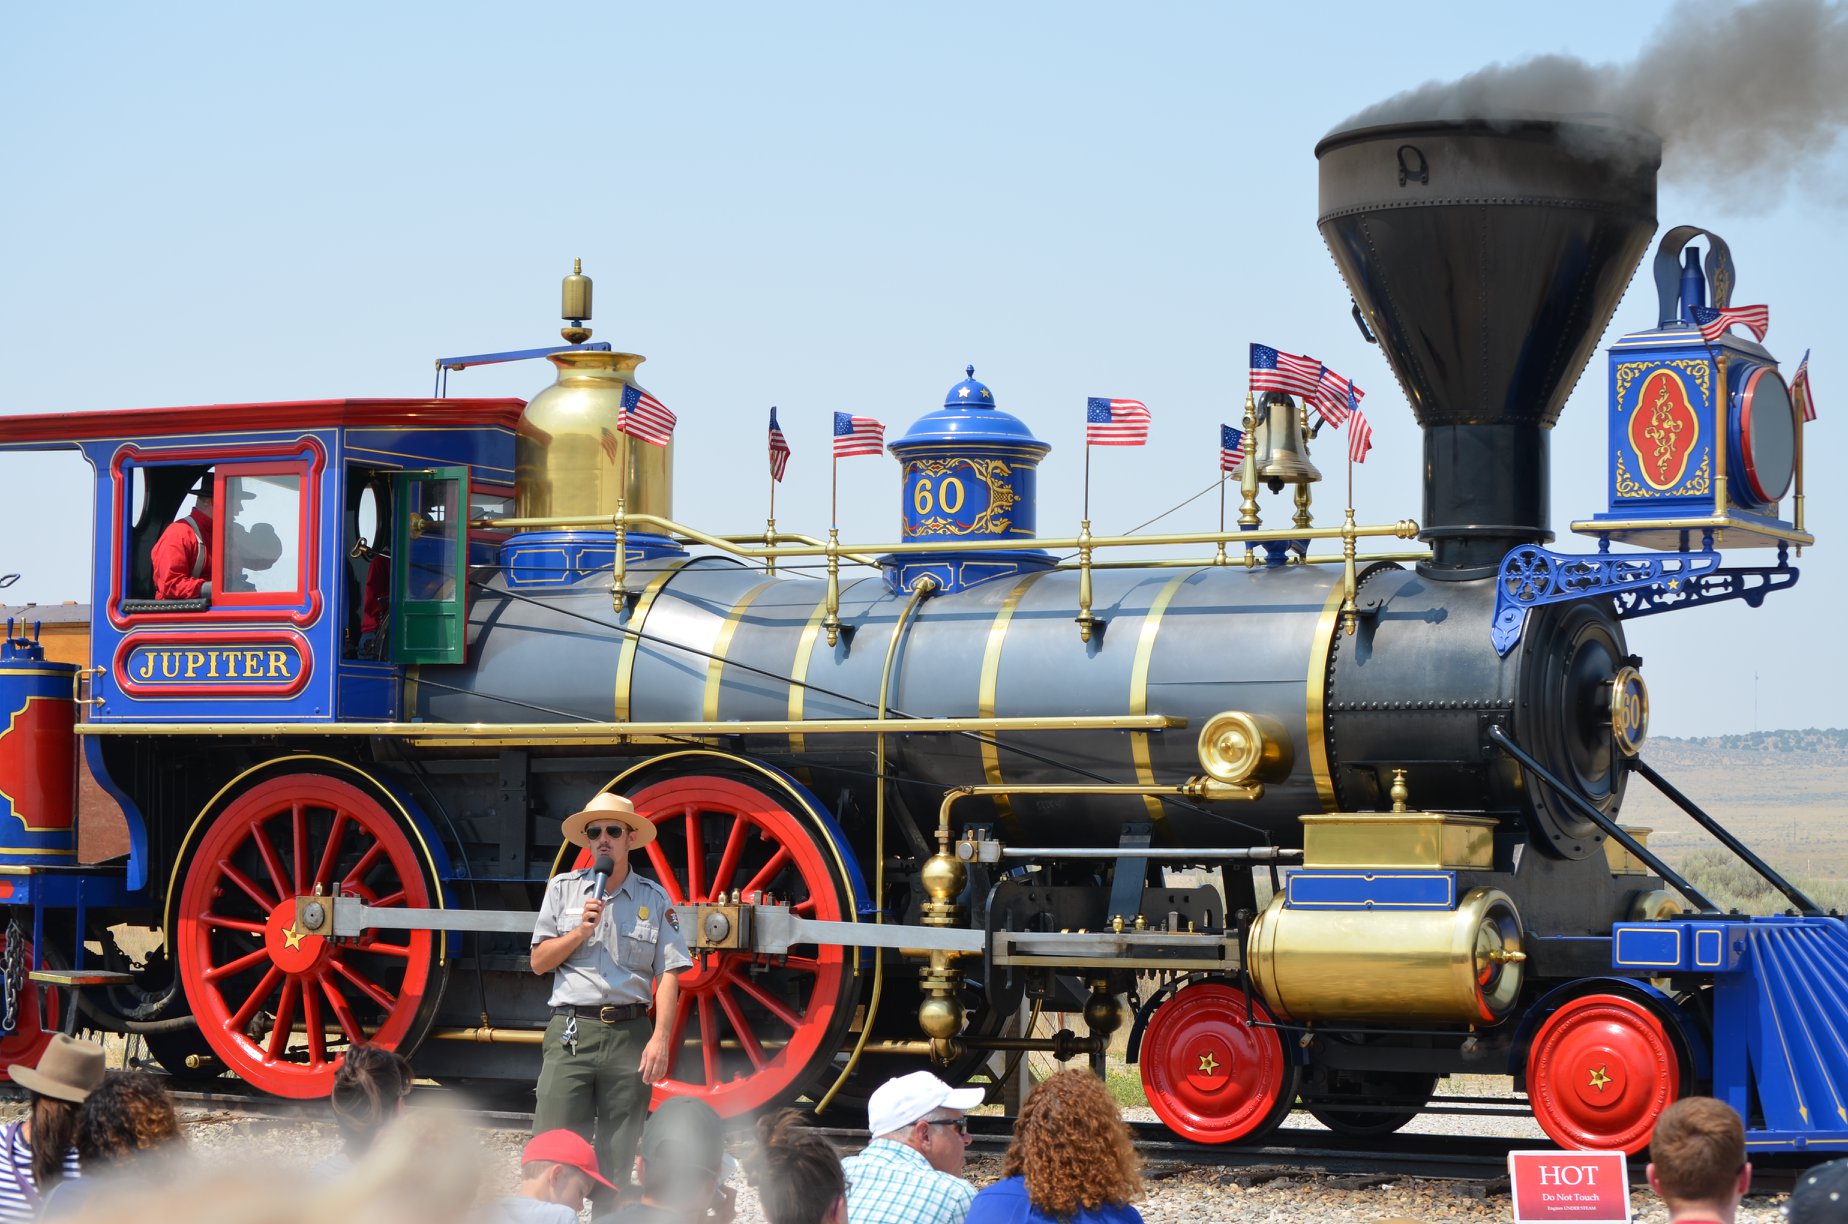 Great Escapes: Golden Spike National Historic Site - RV LIFE